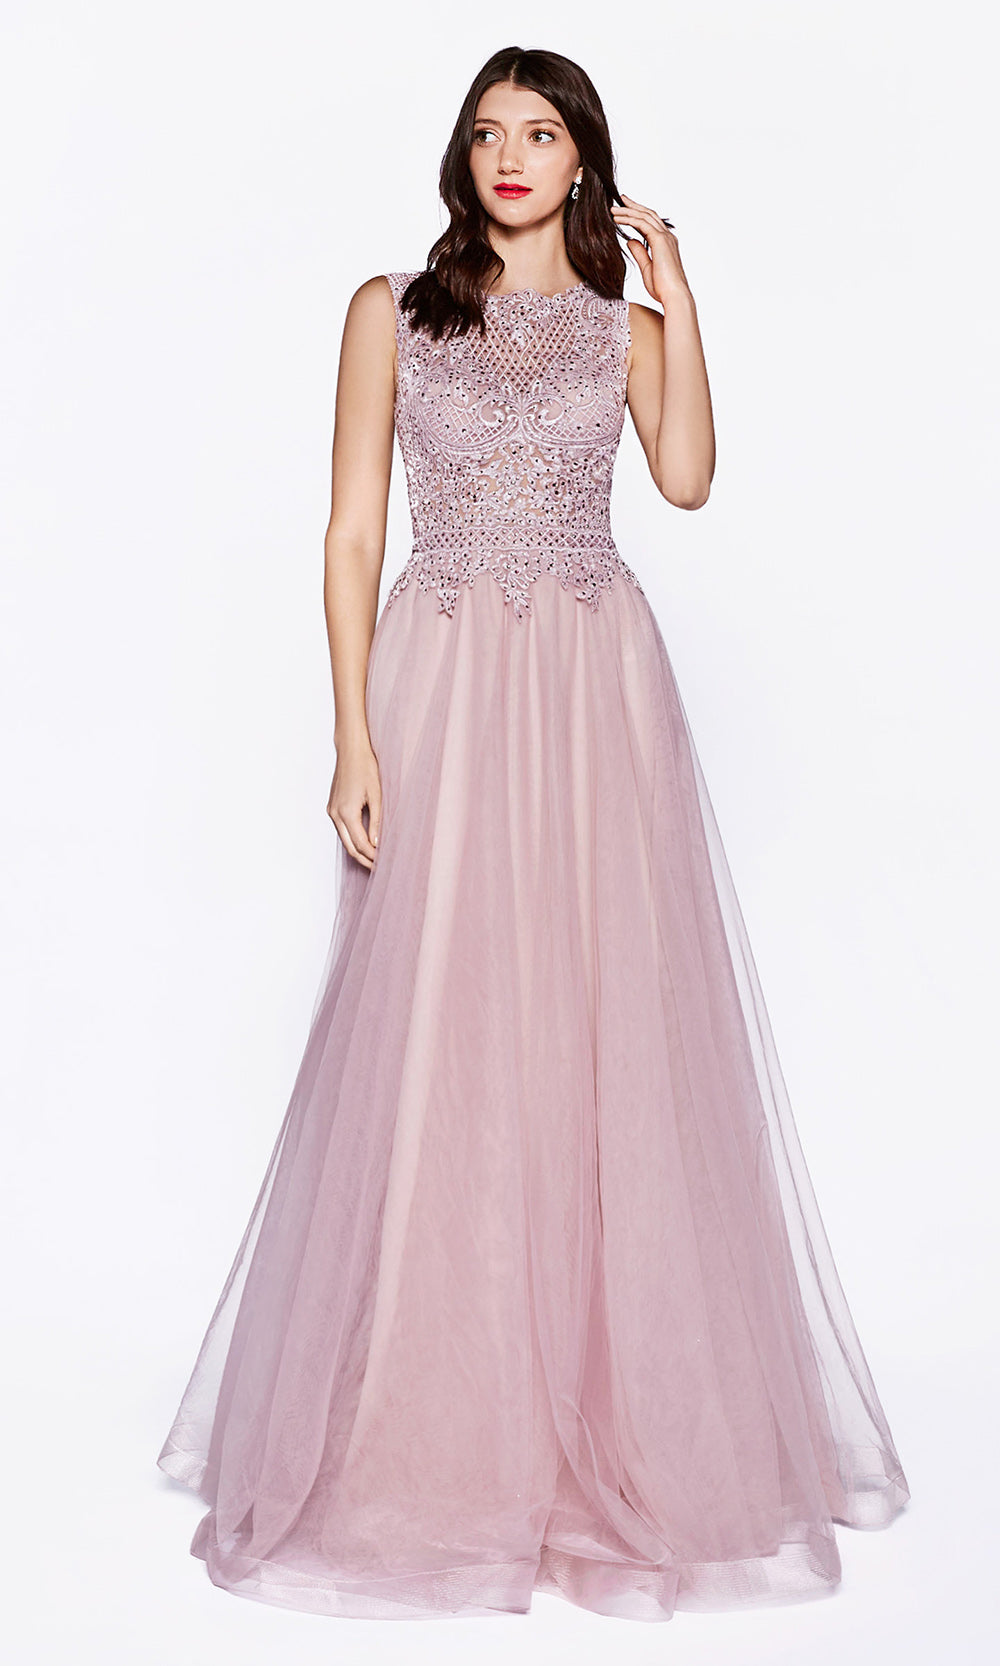 Cinderella Divine CD0144 mauve pink high neck flowy dress with beaded lace top. Perfect Dusty rose dress for prom, bridesmaids, formal wedding guest dress, & mother of bride/groom. Plus sizes avail.jpg